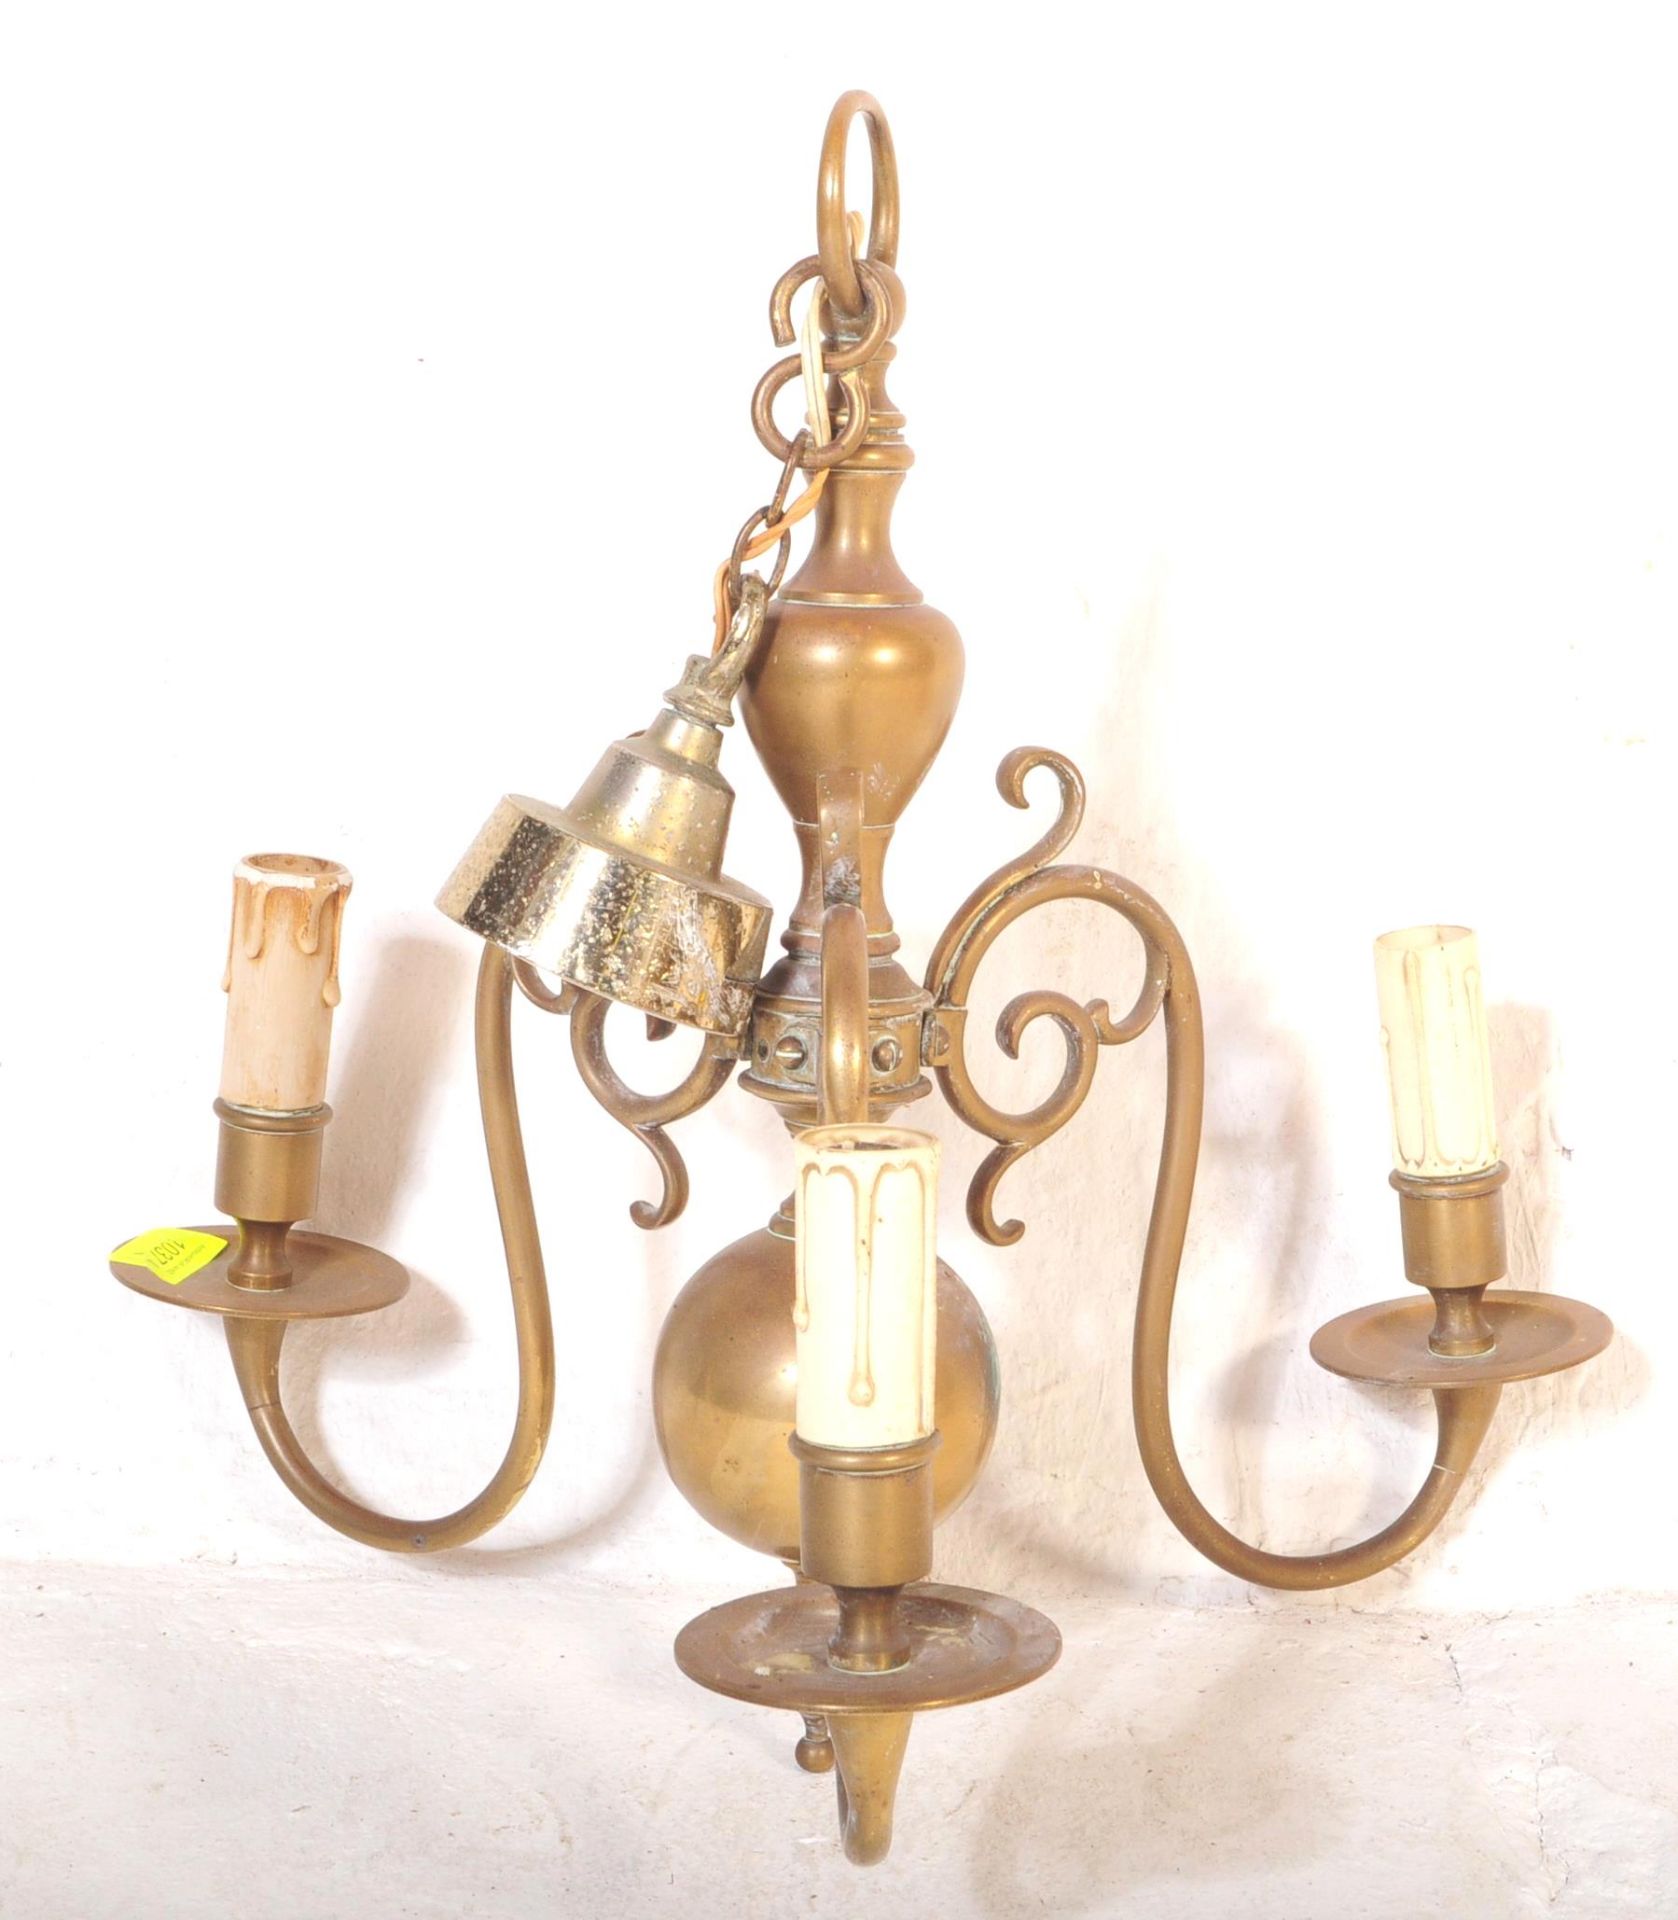 A VICTORIAN 19TH CENTURY BRASS HANGING CEILING LIGHT - Image 4 of 4